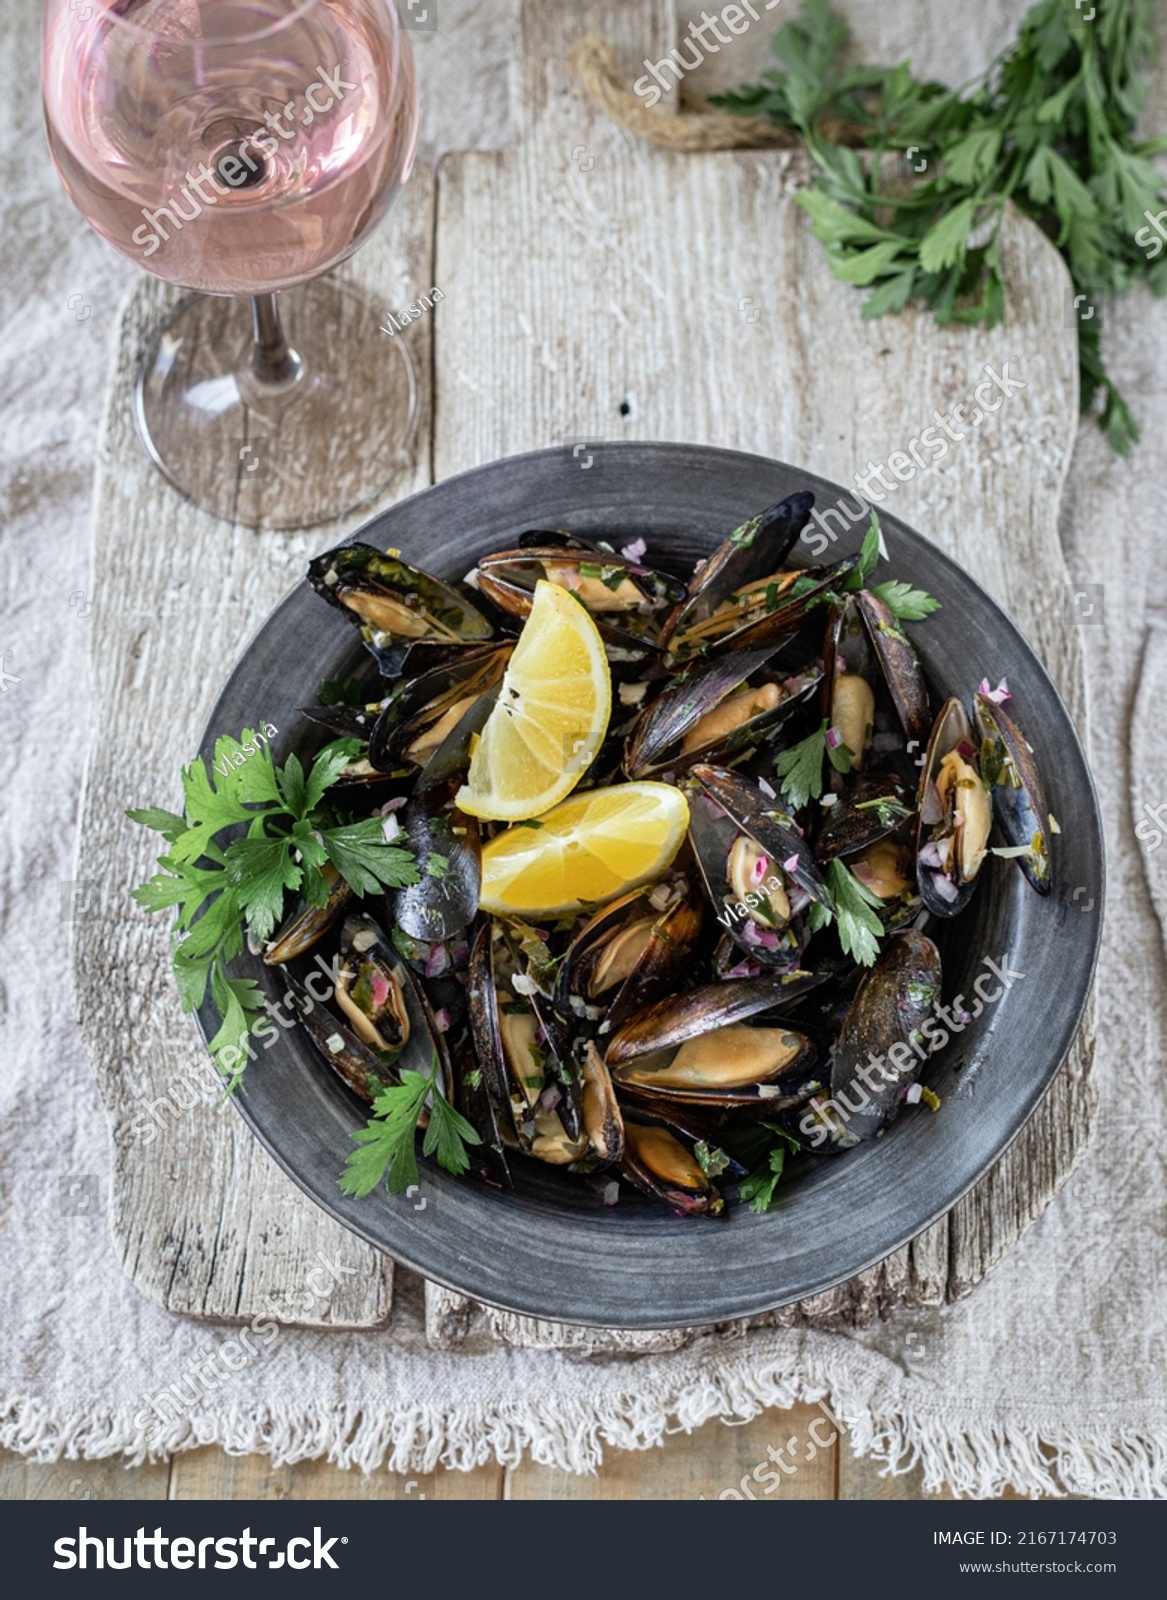 Mussels prepared with white wine, butter, garlic, lemon and herbs; served on a rustic black ceramic plate with rosé wine
Top view #2167174703